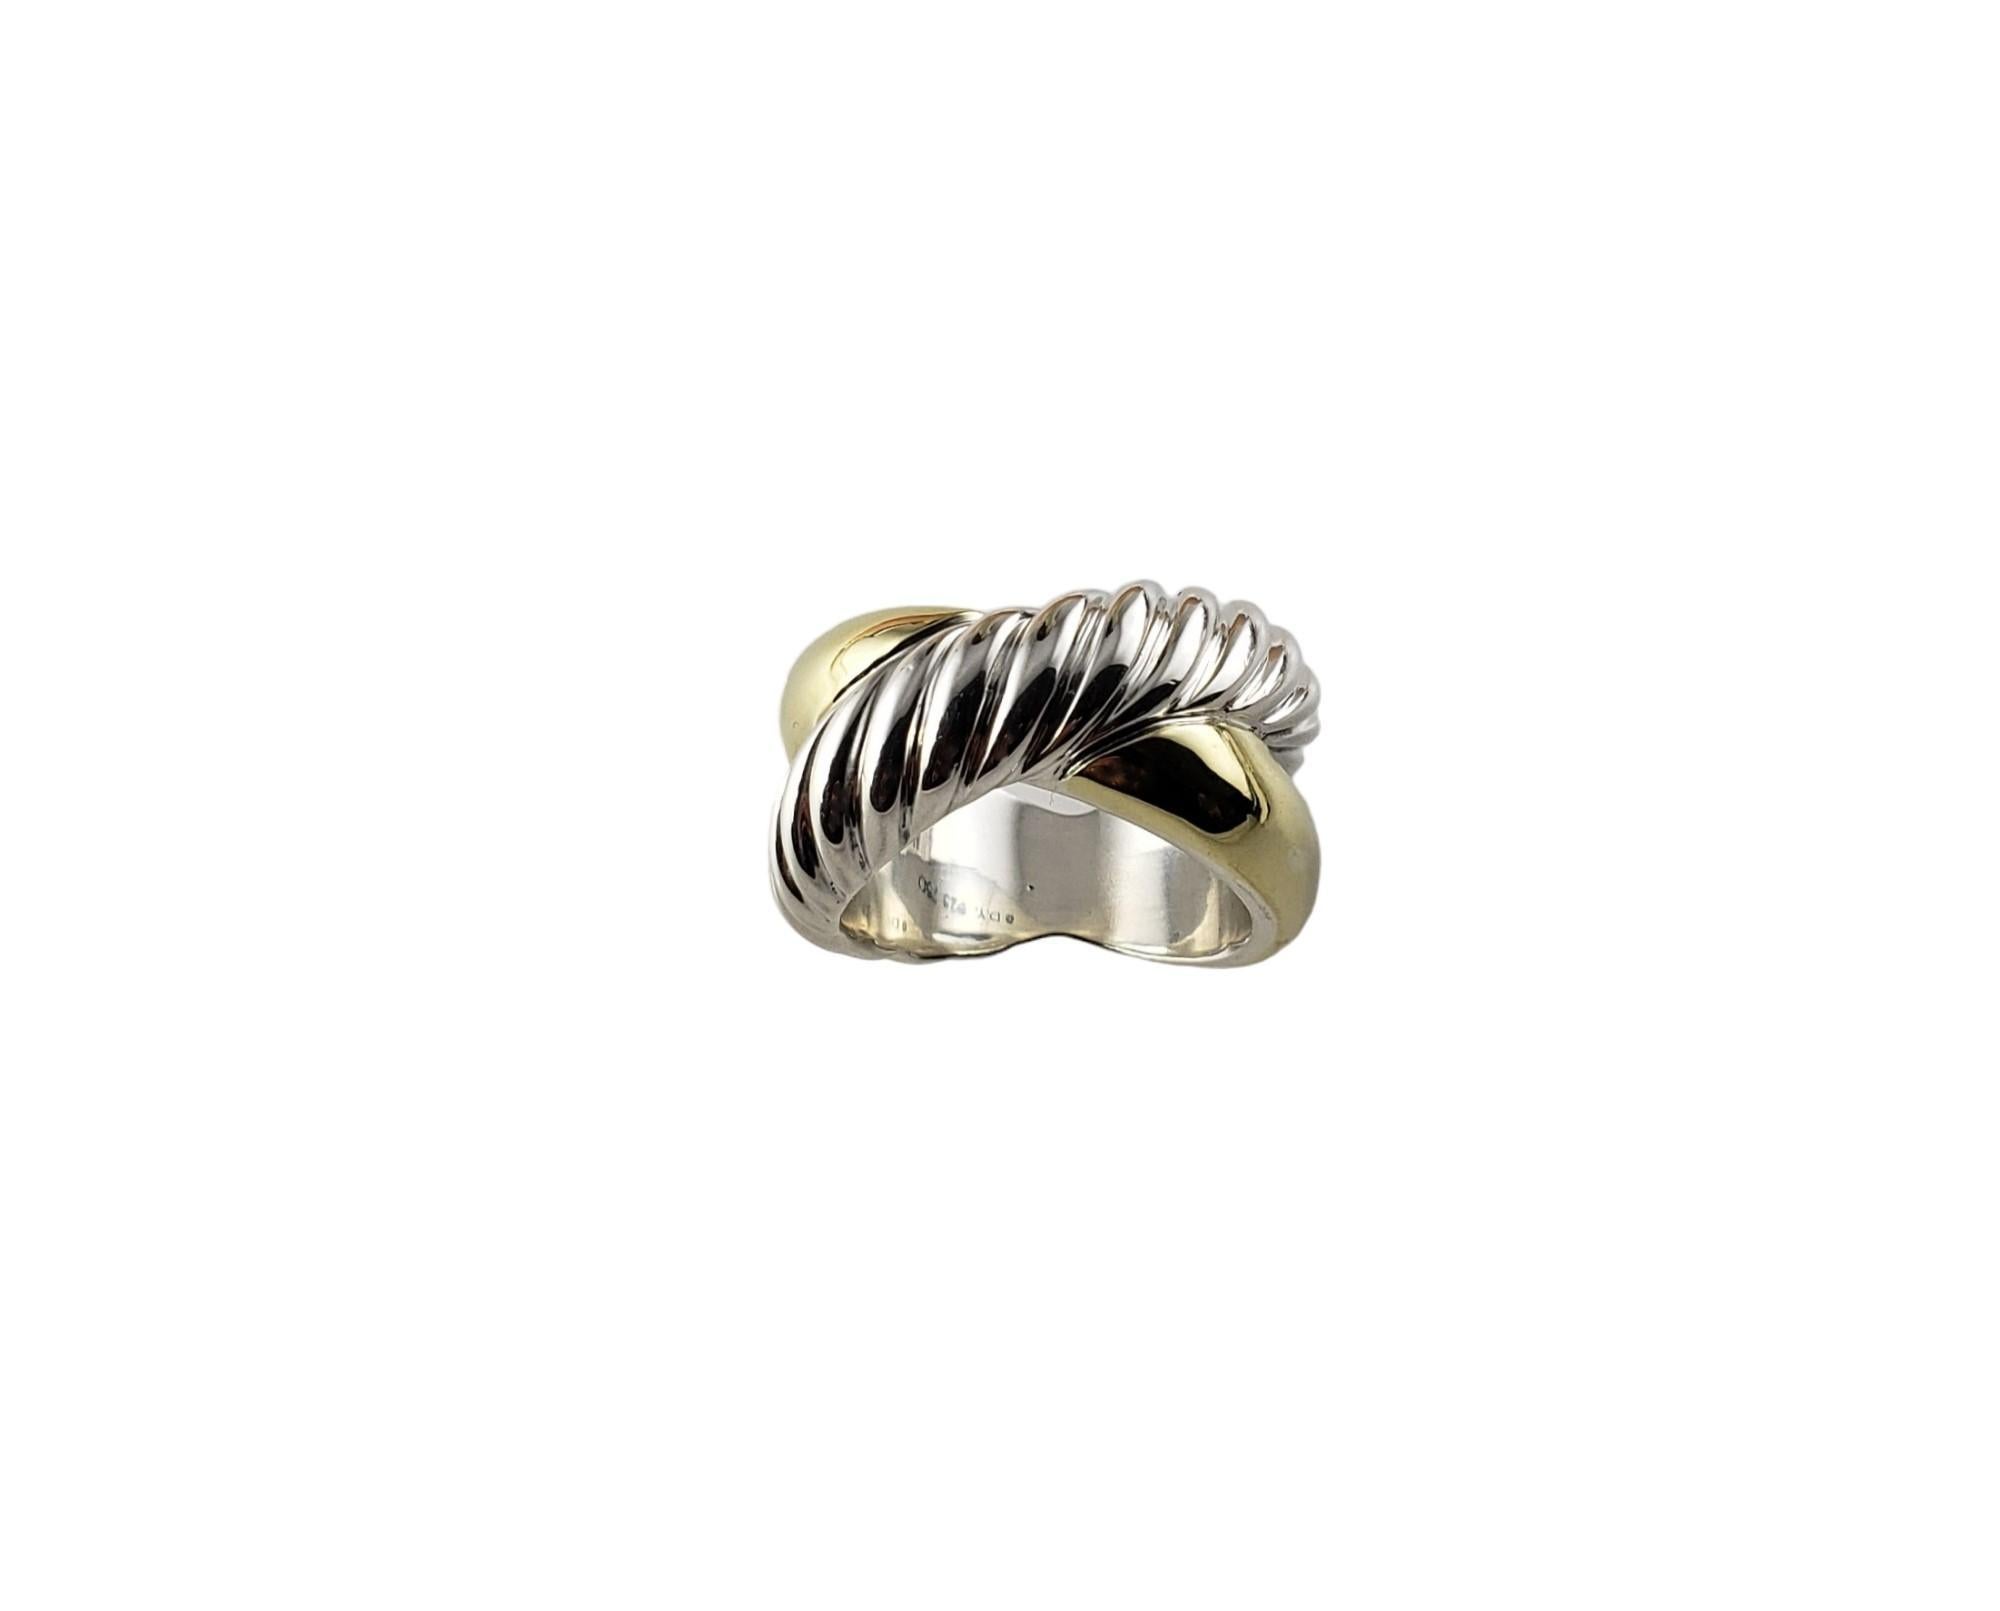 Vintage David Yurman Sterling Silver and 18K Yellow Gold Ring Size 6 #15399-

This elegant ring by David Yurman is crafted in beautifully detailed 18K yellow gold and sterling silver.  Width:  12.4 mm.

Ring size: 6

Hallmark:  DY  925  750

Weight: